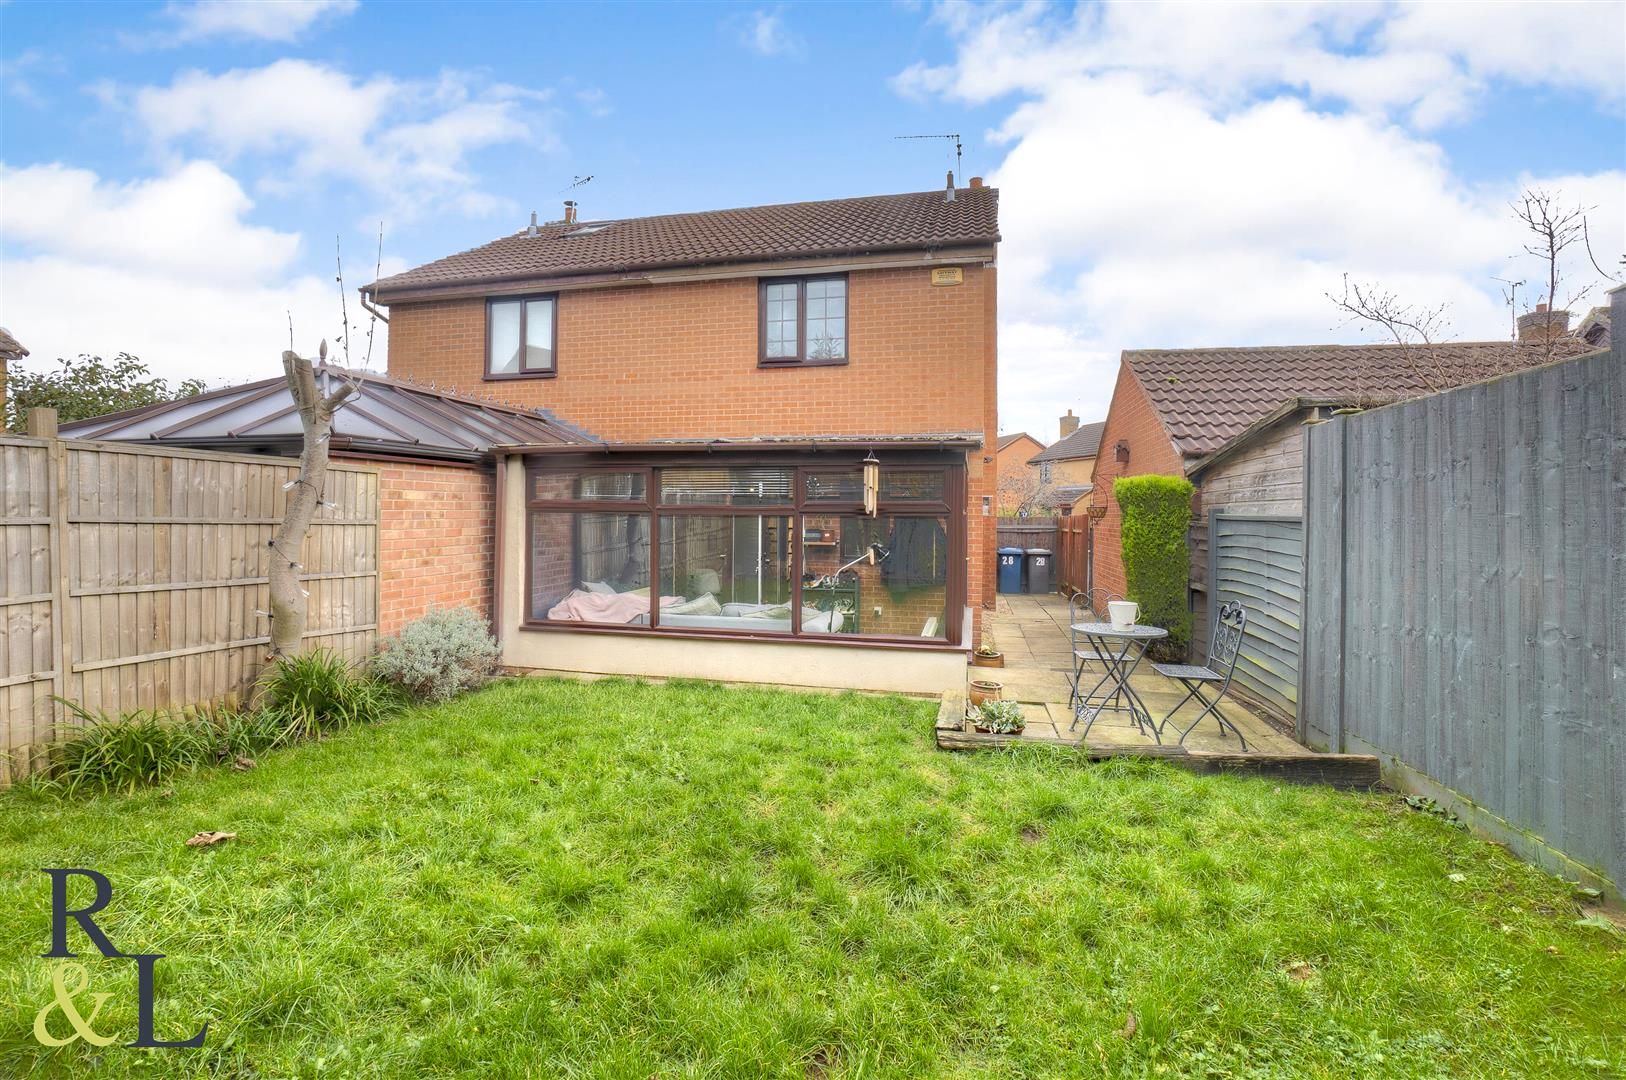 Property image for Gripps Common, Cotgrave, Nottingham